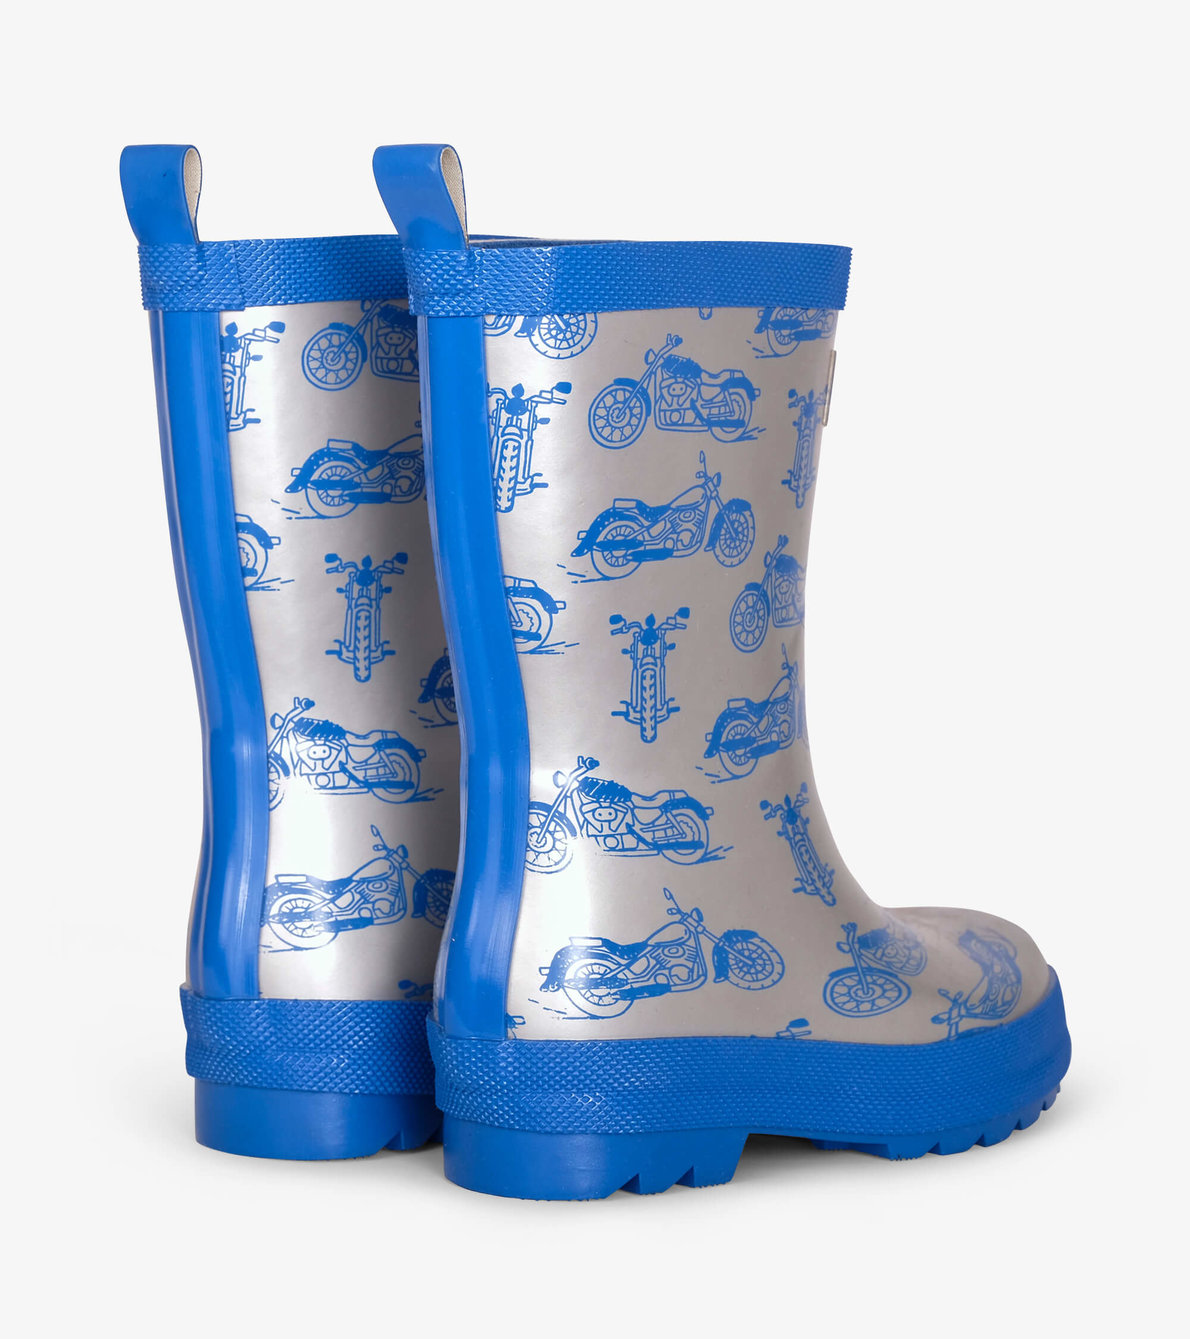 View larger image of Motorcycles Rain Boots